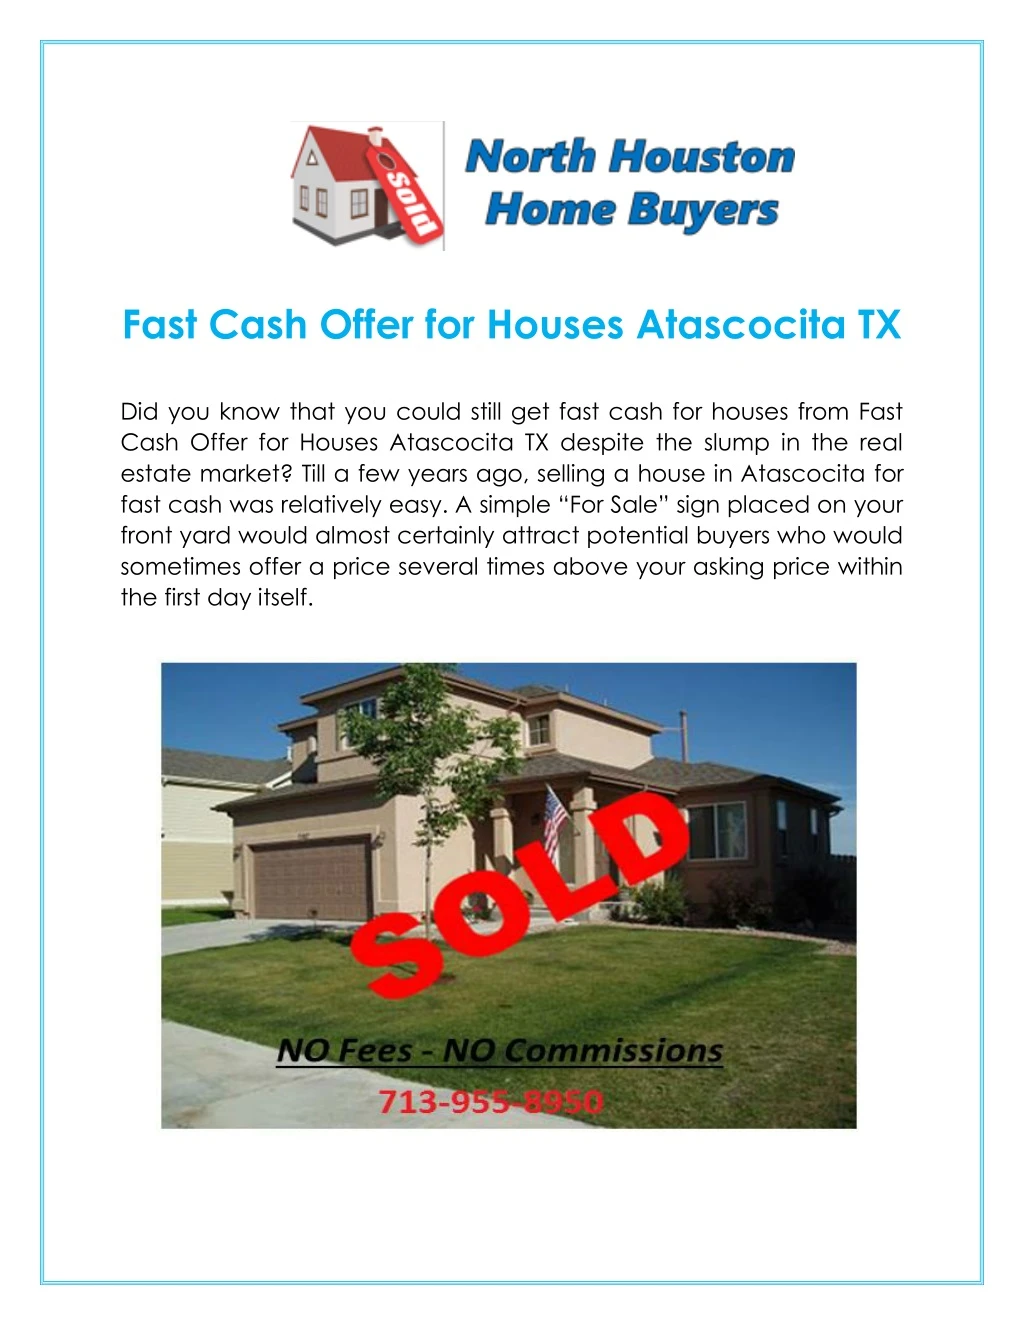 fast cash offer for houses atascocita tx